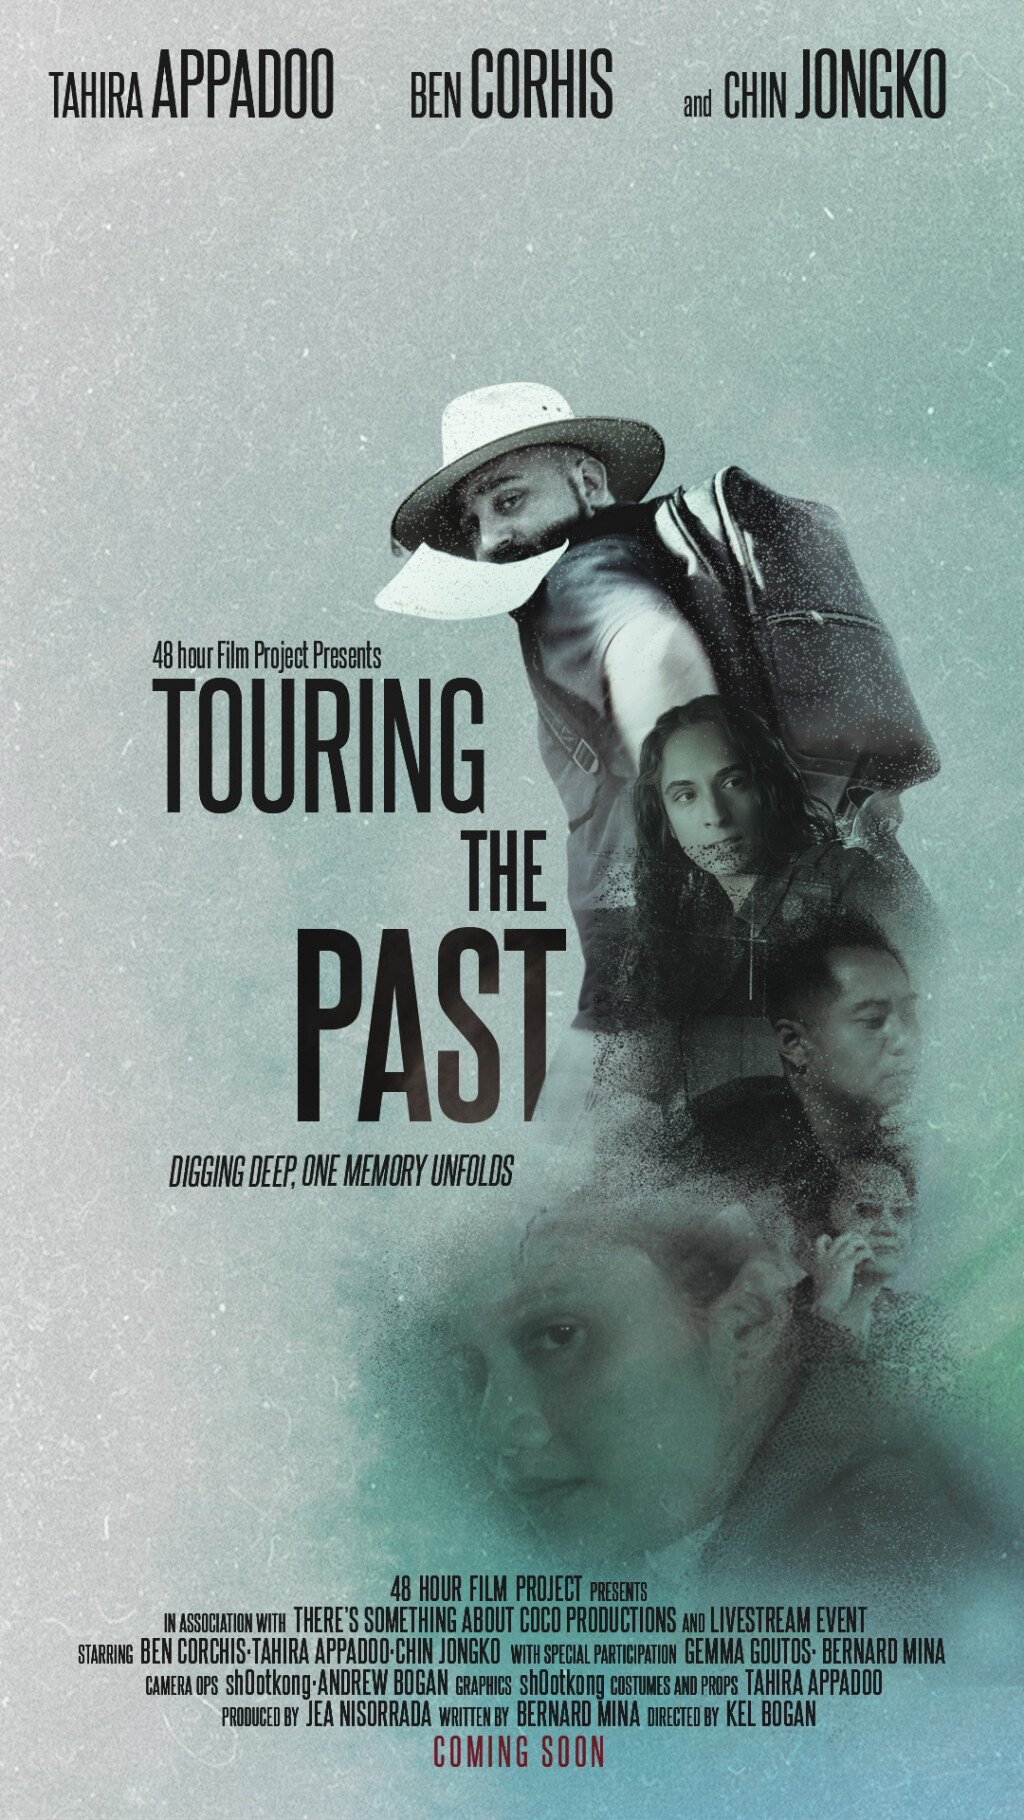 Filmposter for Touring the Past